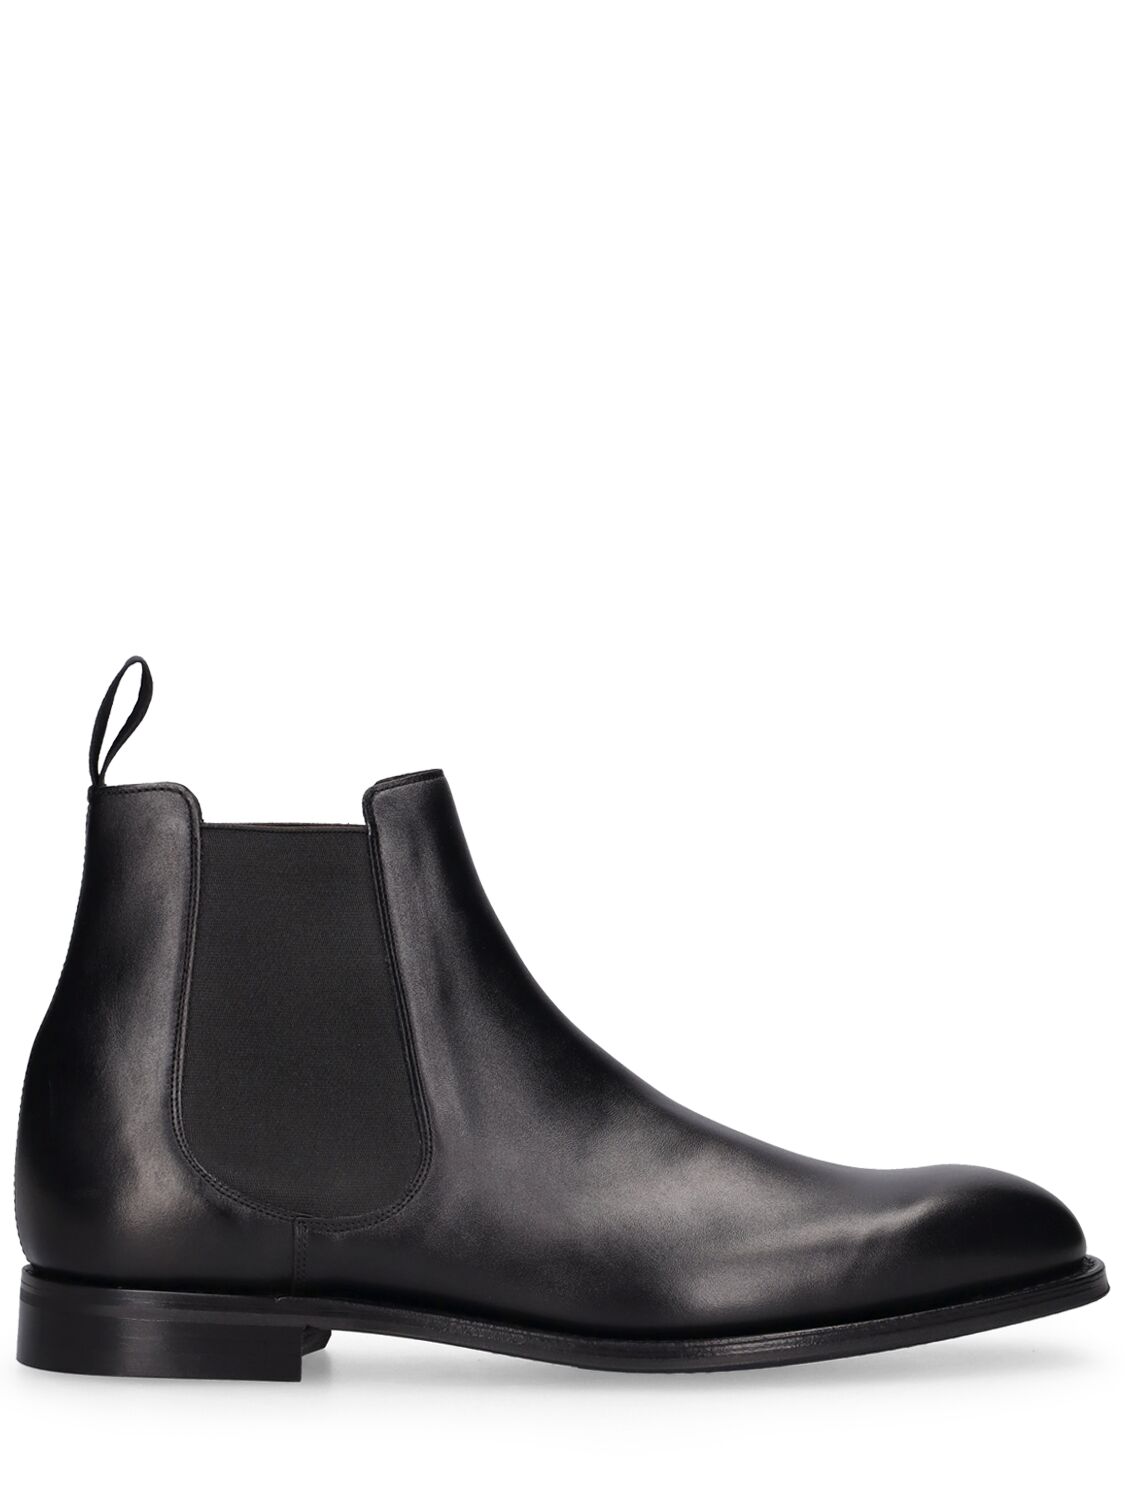 CHURCH'S AMBERLEY LEATHER CHELSEA BOOTS